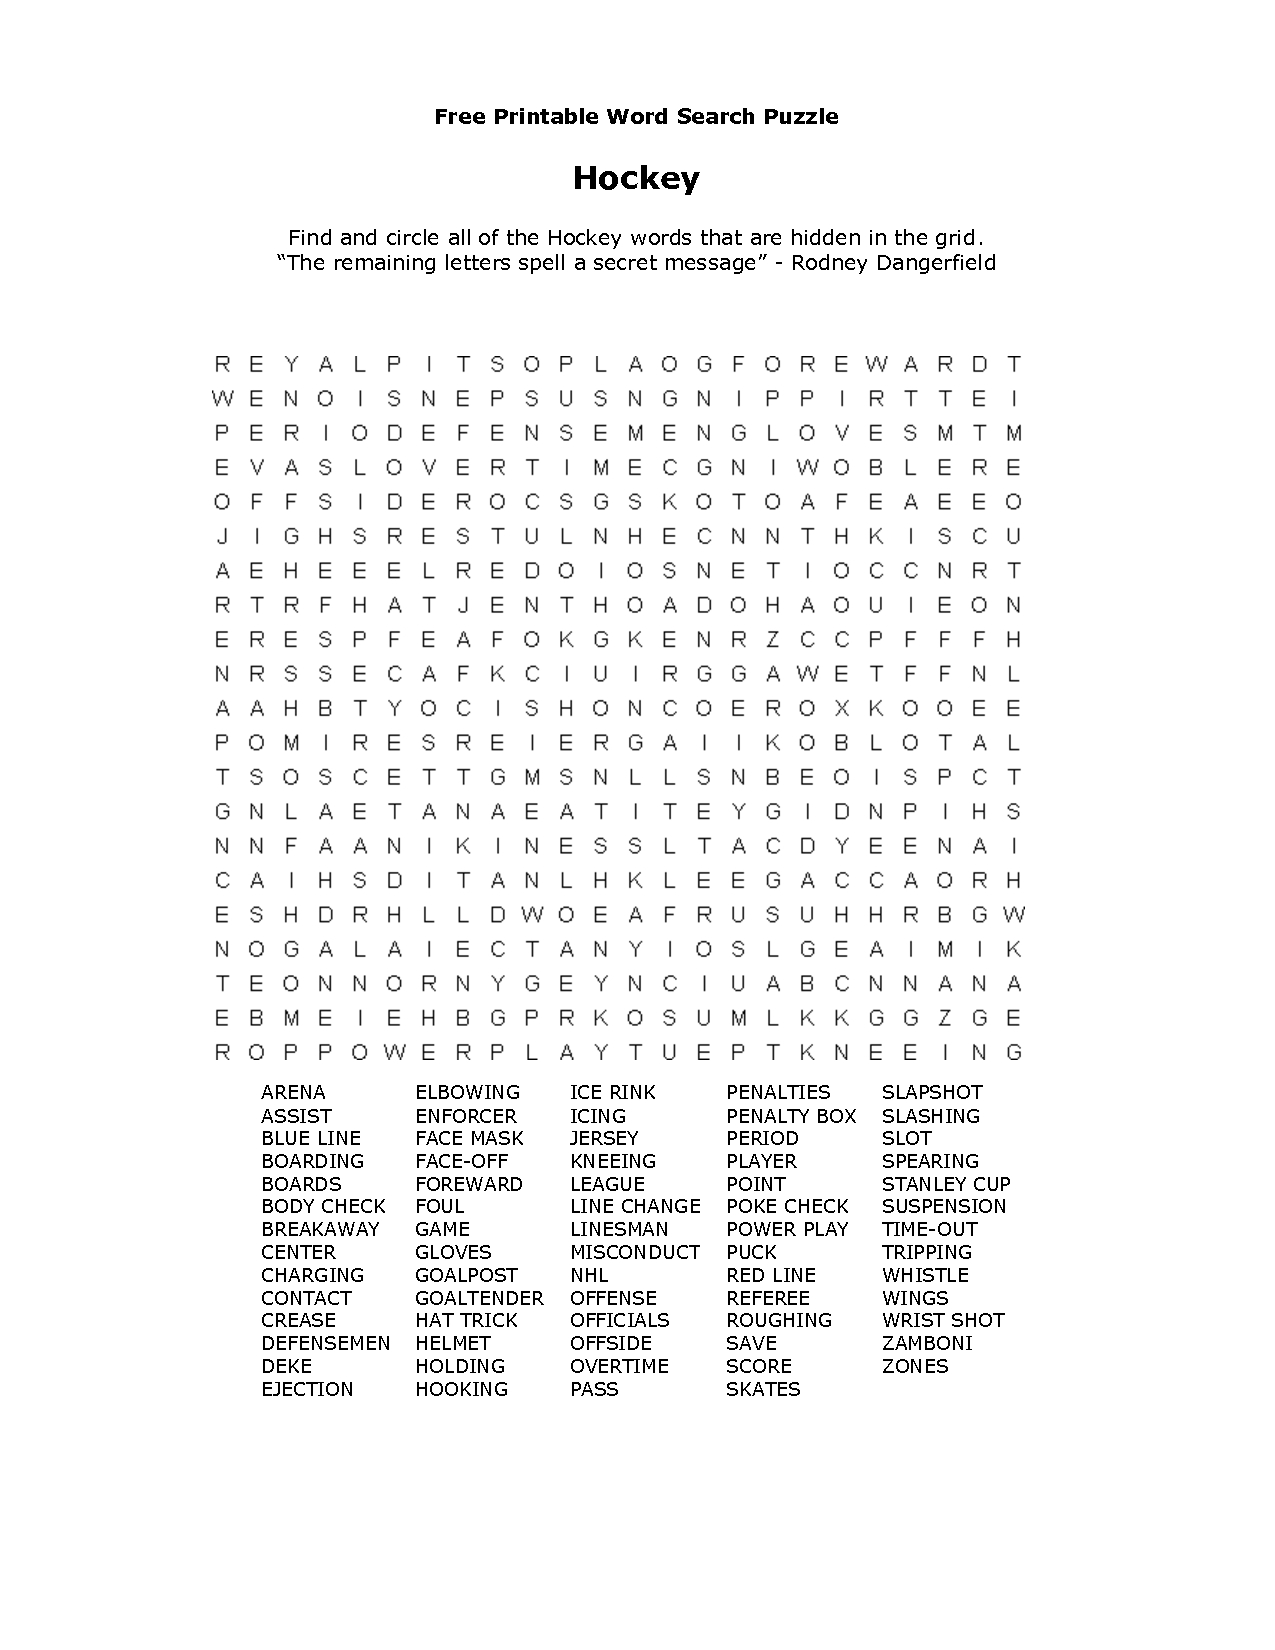 Free Printable Word Search Puzzles Free Printable